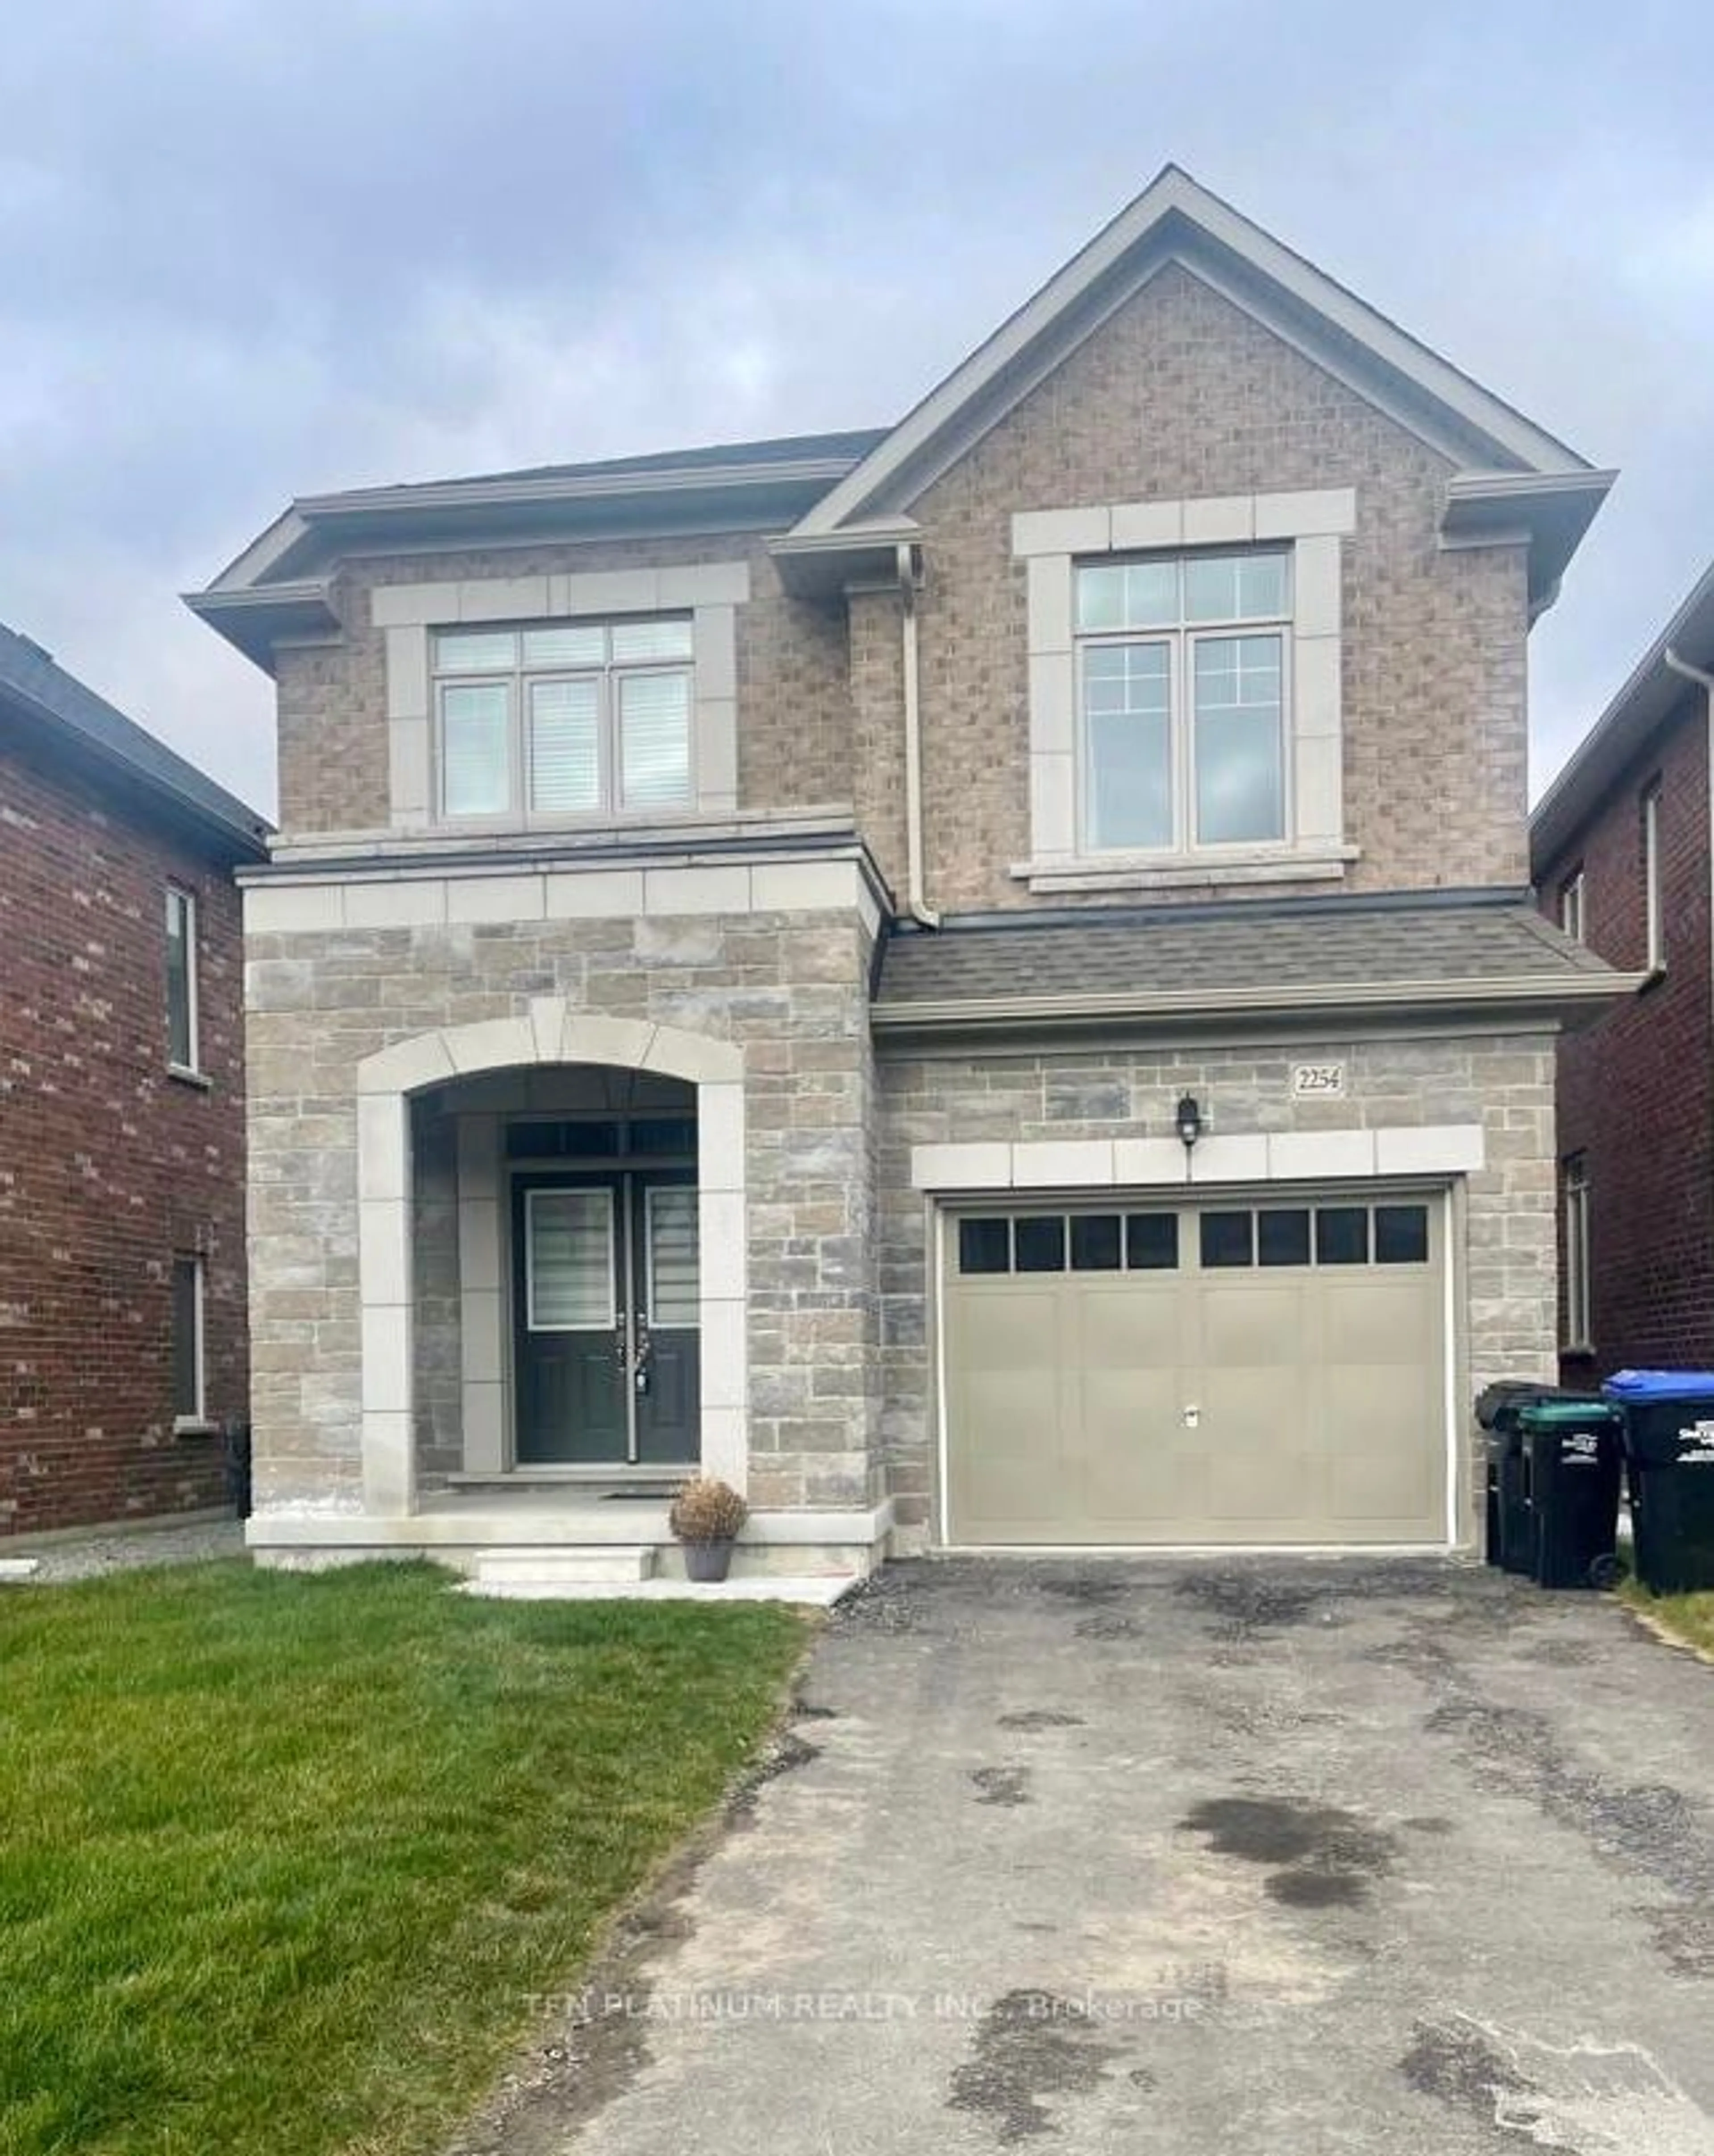 Home with brick exterior material for 2254 Grainger Lp, Innisfil Ontario L9S 0N1